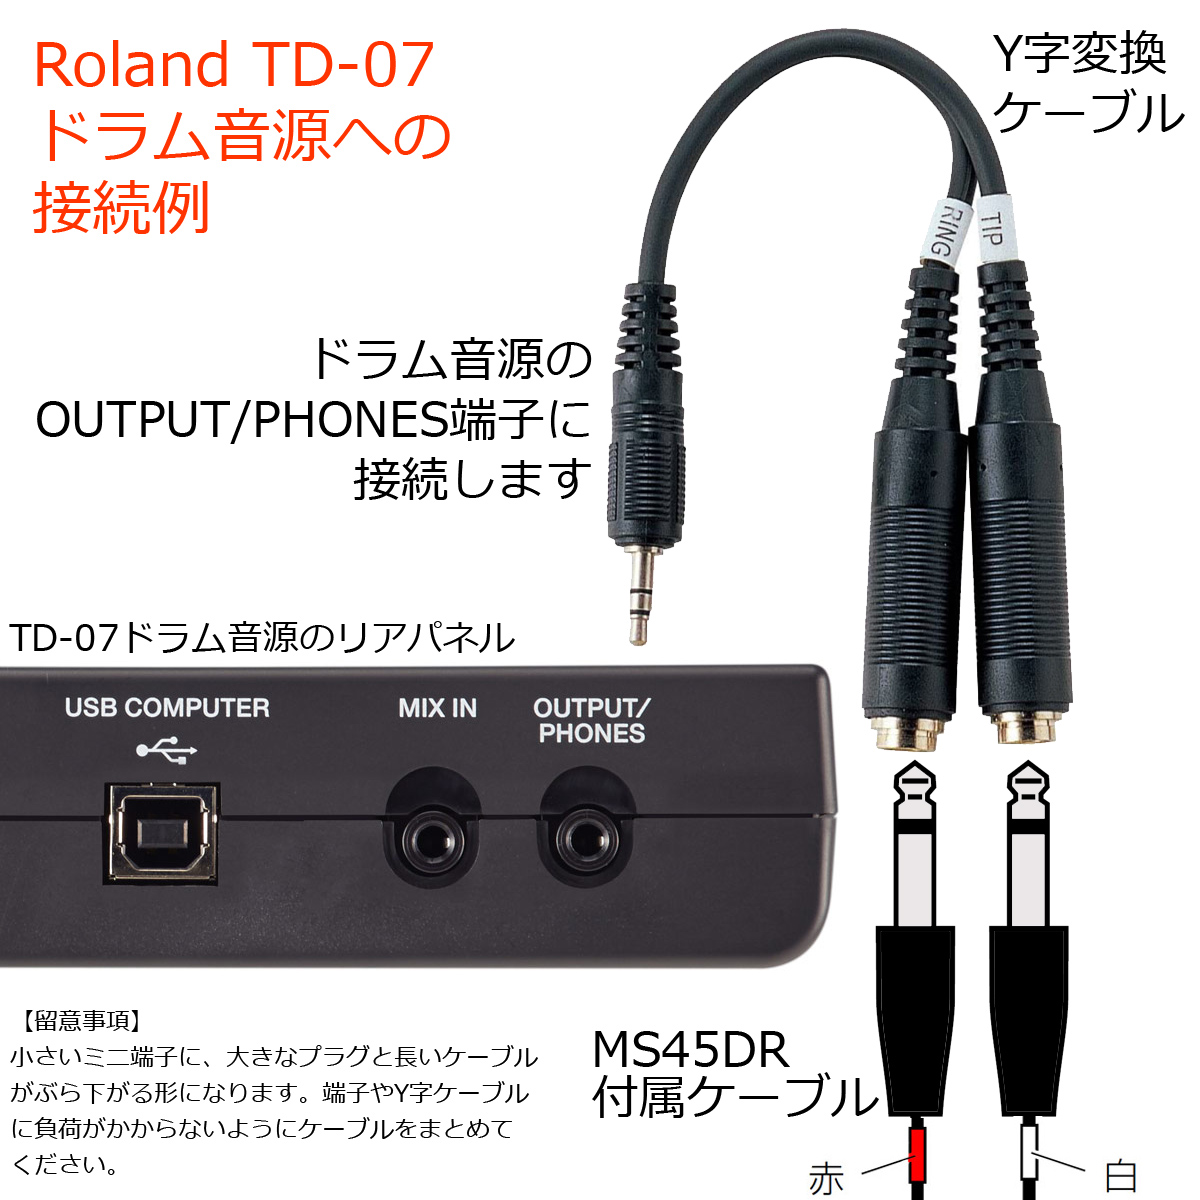 YAMAHA / MS45DR electronic drum for monitor speaker Mini terminal for Y character cable attaching (TD-07 correspondence )